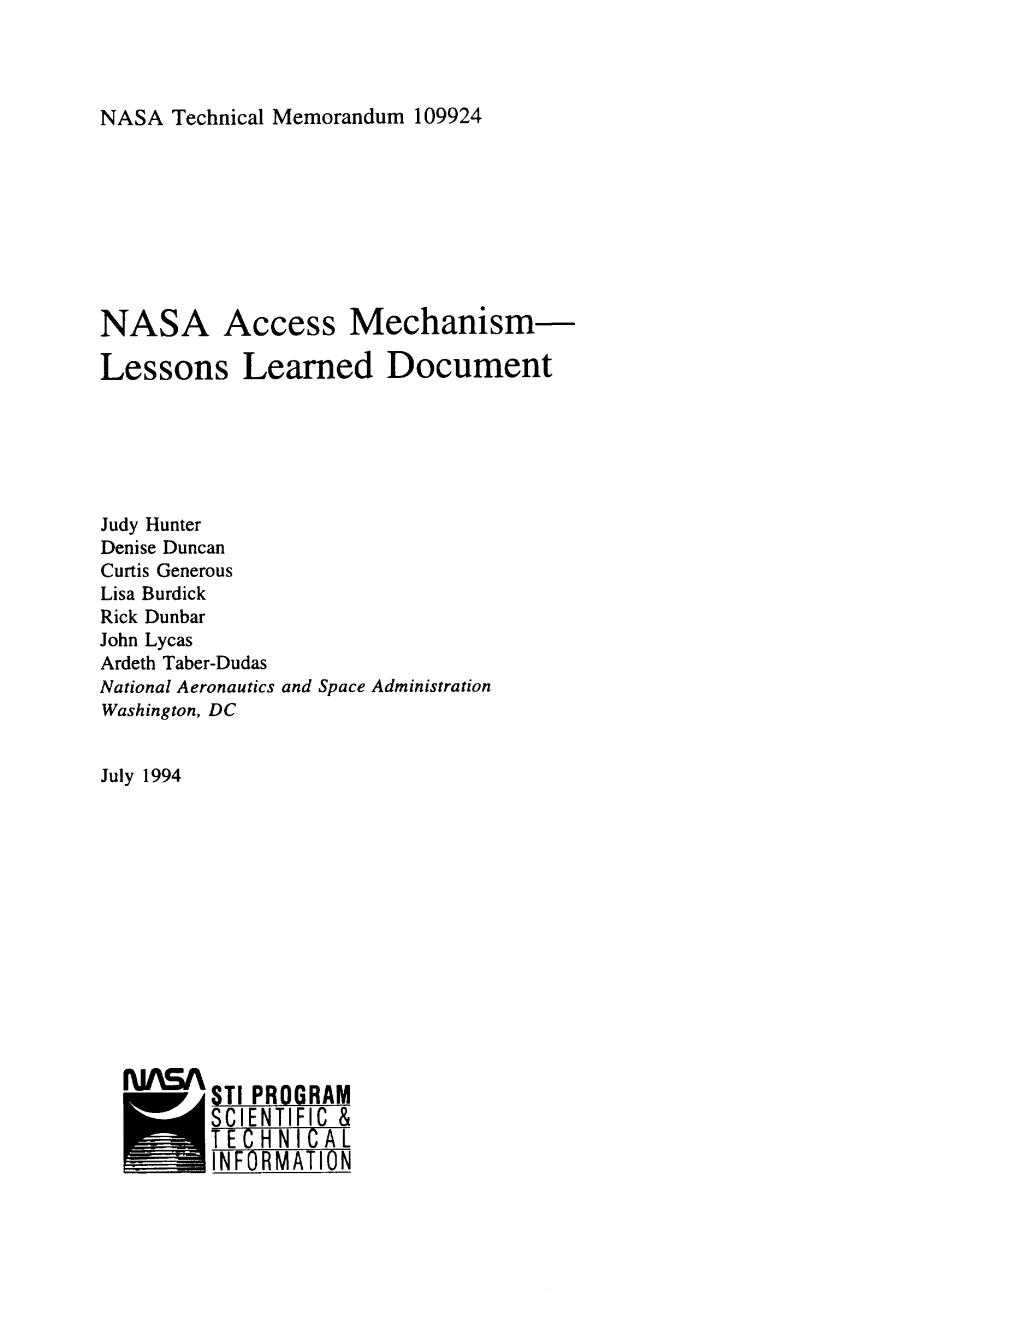 NASA Access Mechanism Lessons Learned Document